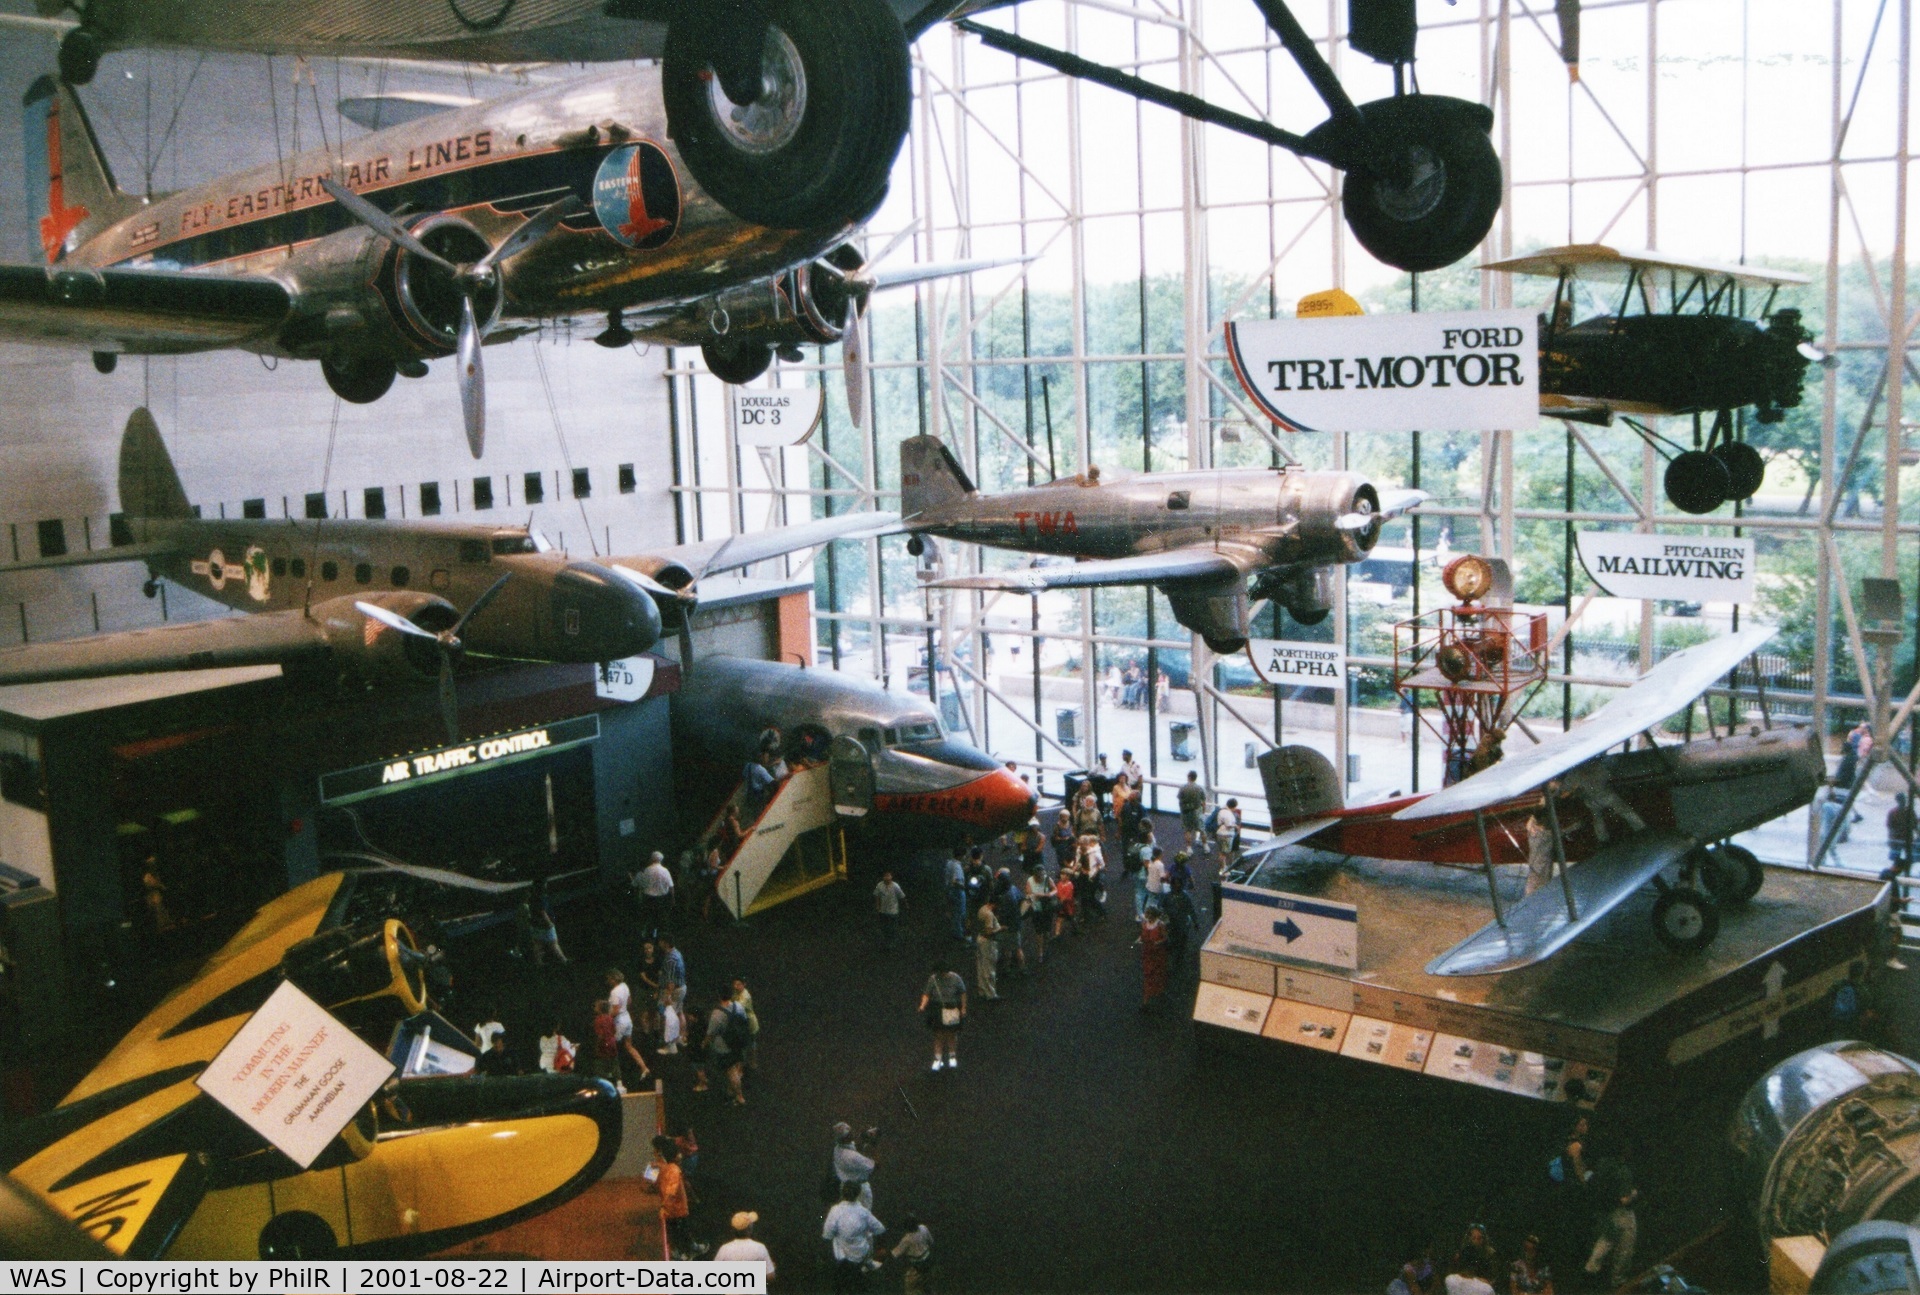 WAS Airport - Scan of a poor photo of the Civil Aviation Hall at the Smithsonian Institute in Washington DC.